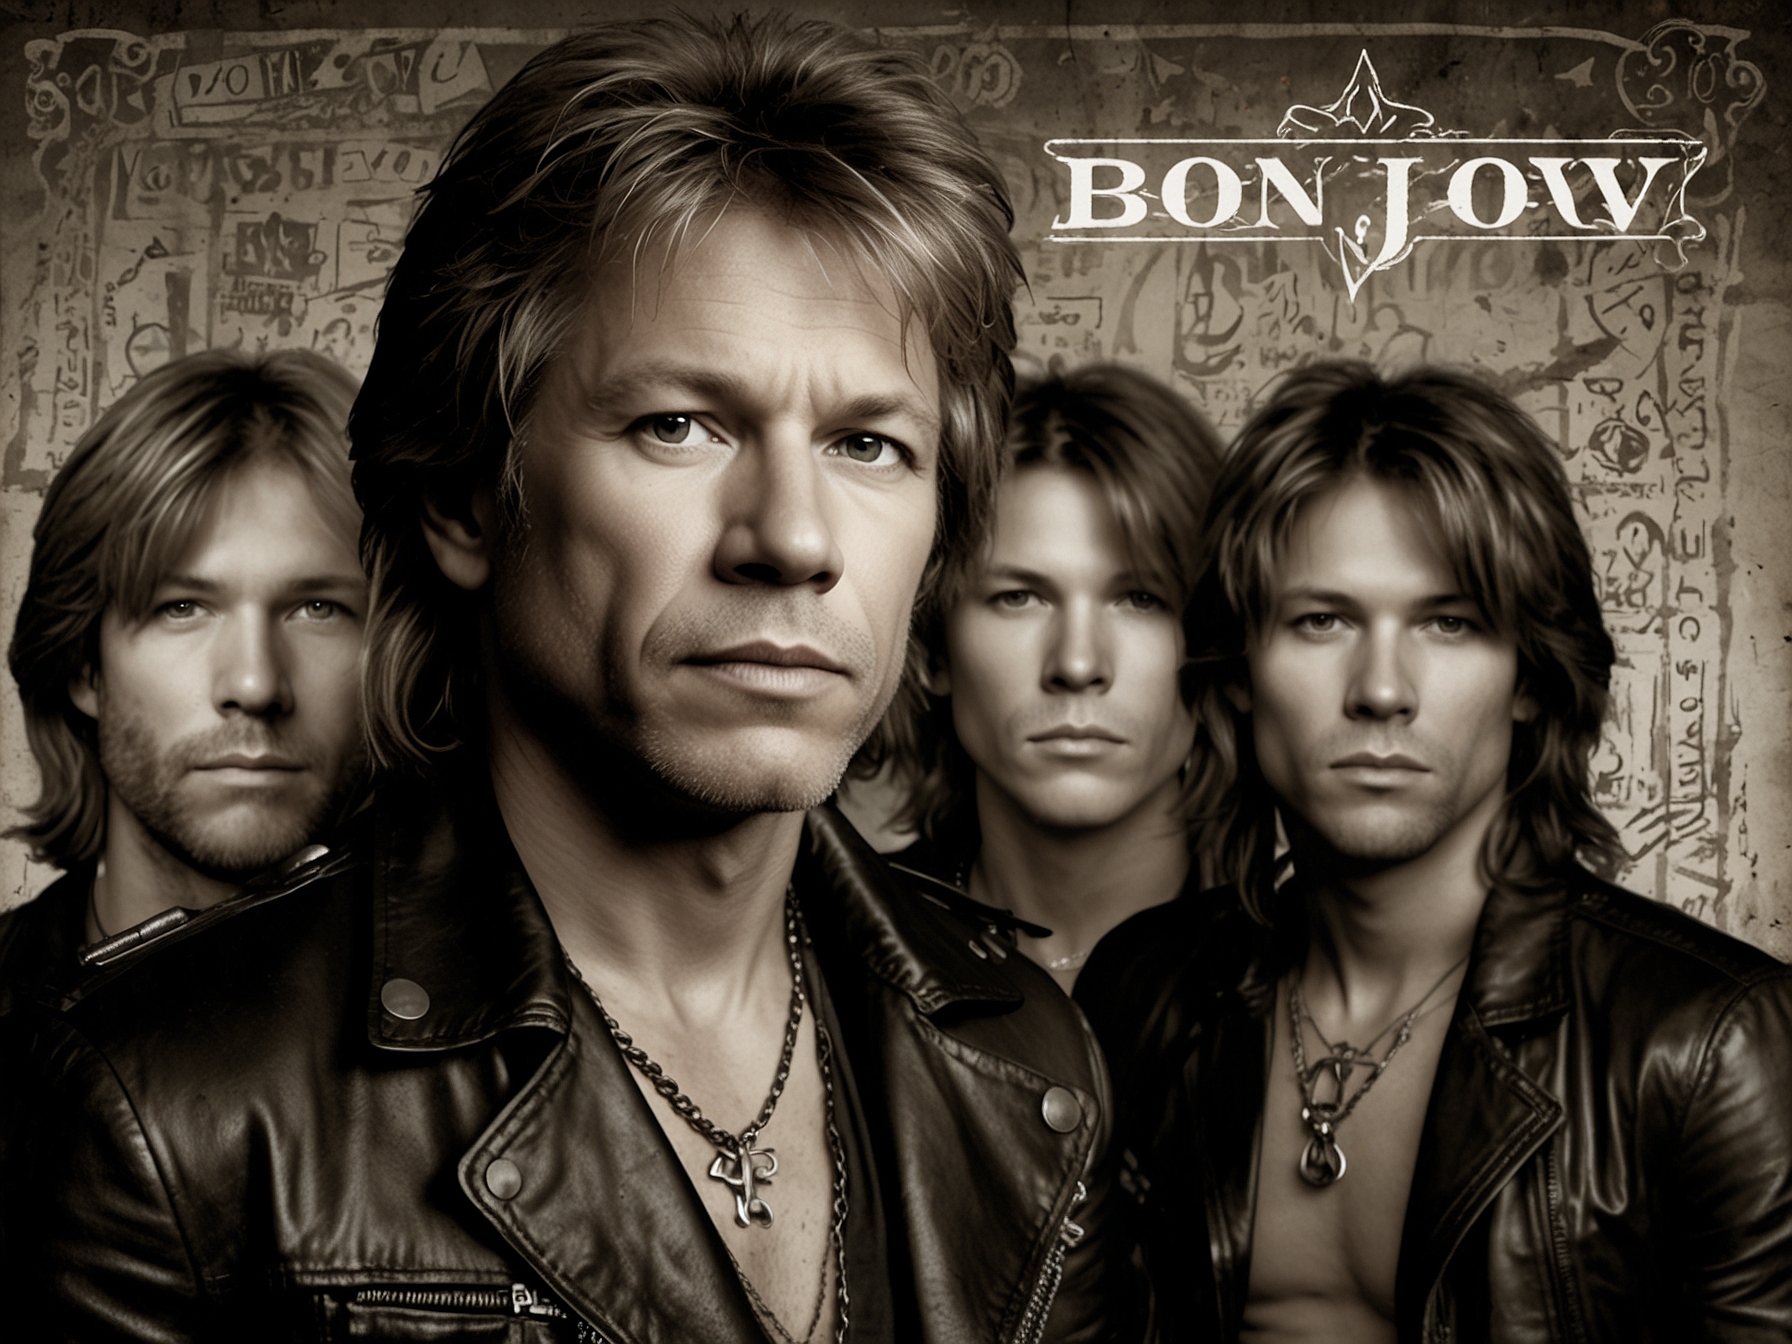 A snapshot of Bon Jovi’s album cover 'Forever', featuring artistic elements that blend classic rock motifs with modern design, indicative of the album's fresh take on timeless themes.